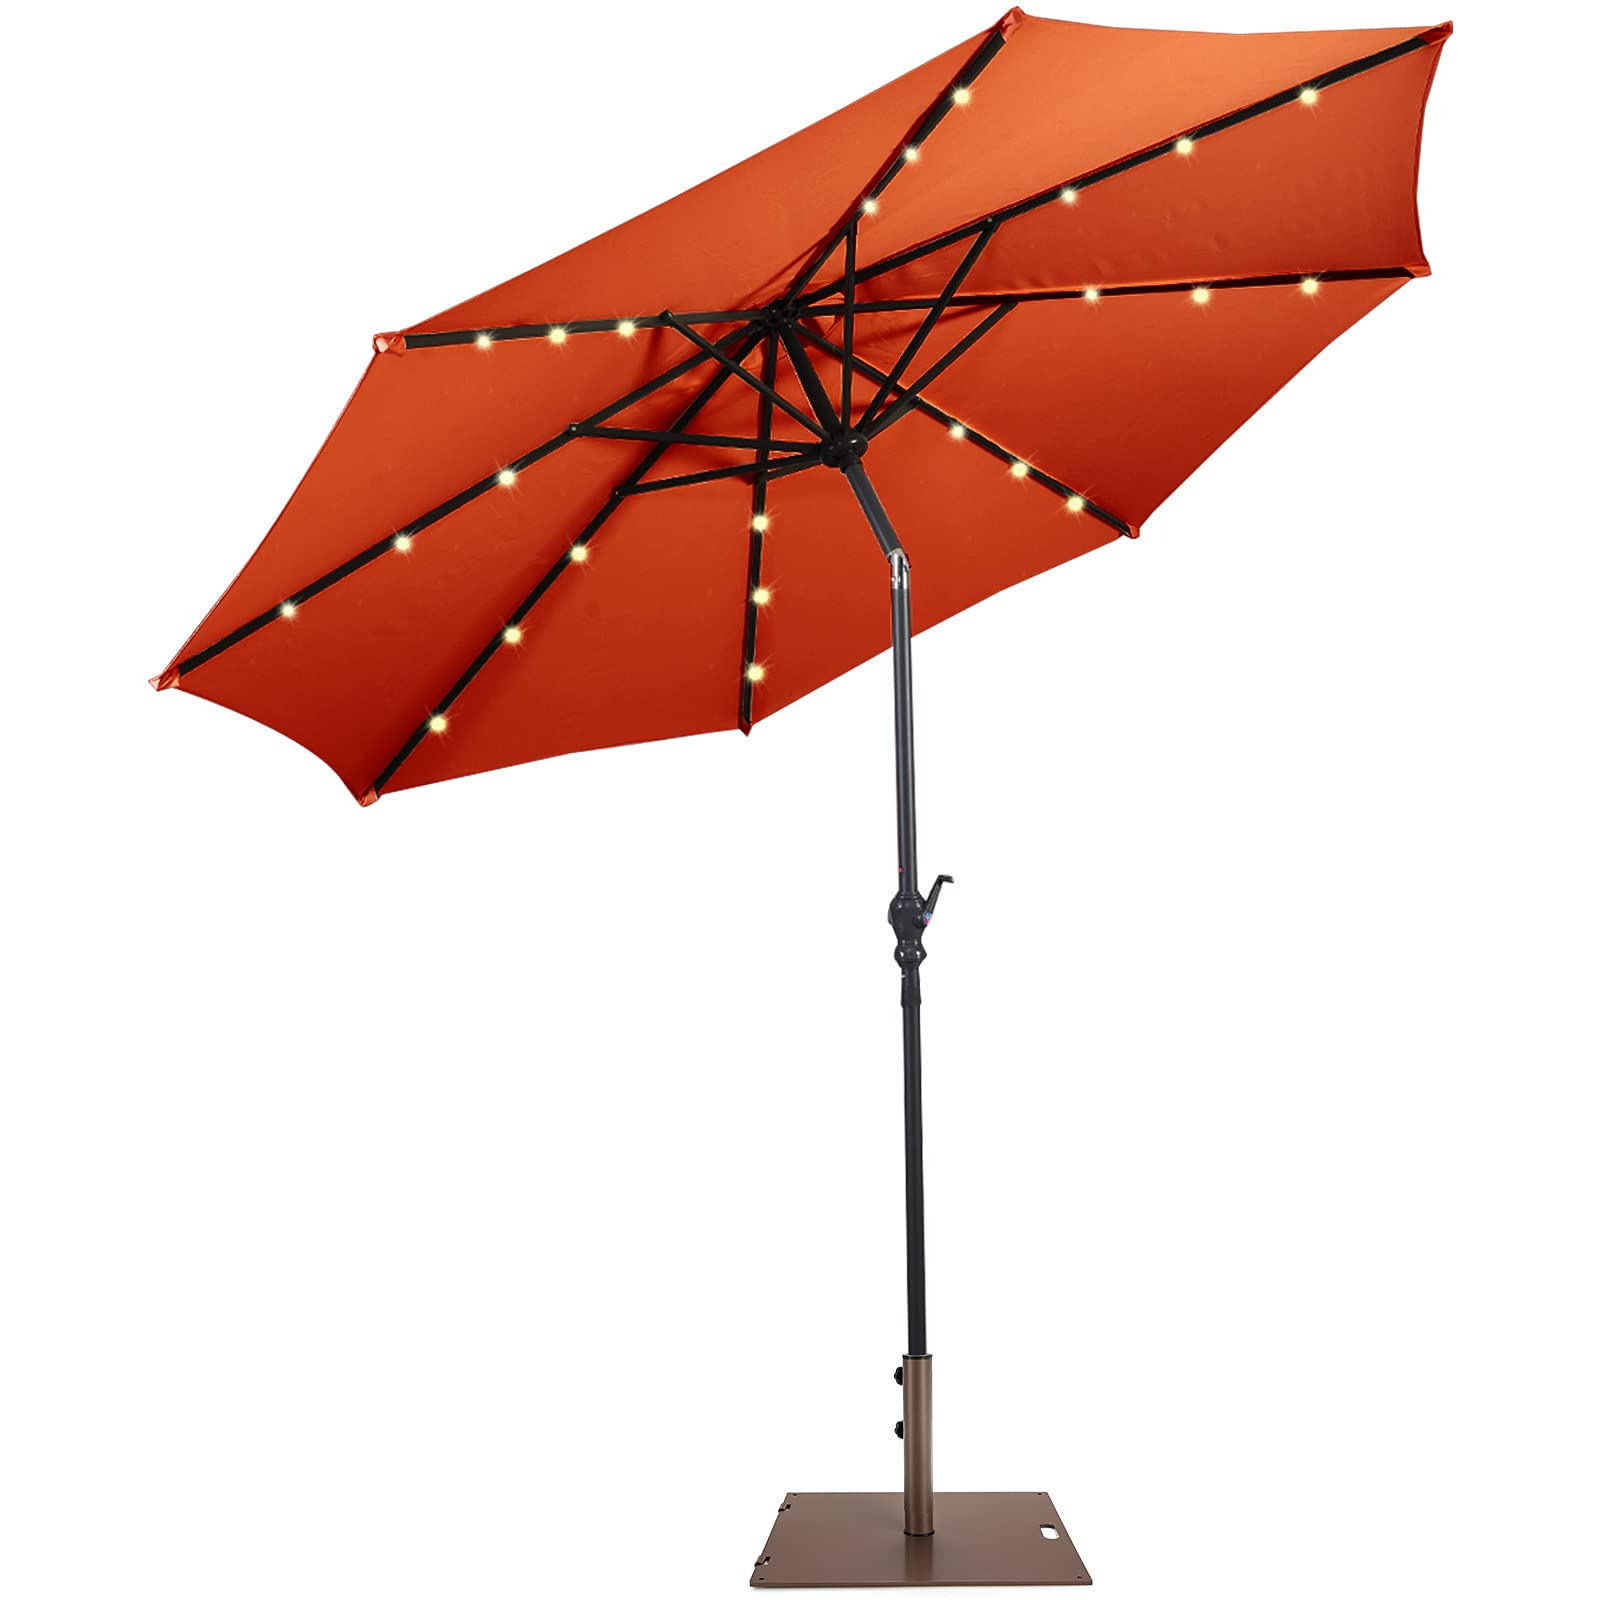 Giantex Patio Umbrella with Base Stand, 10ft Solar Led Lights Outdoor Umbrella and 50 LBS Steel Umbrella Base Stand w/ Wheels